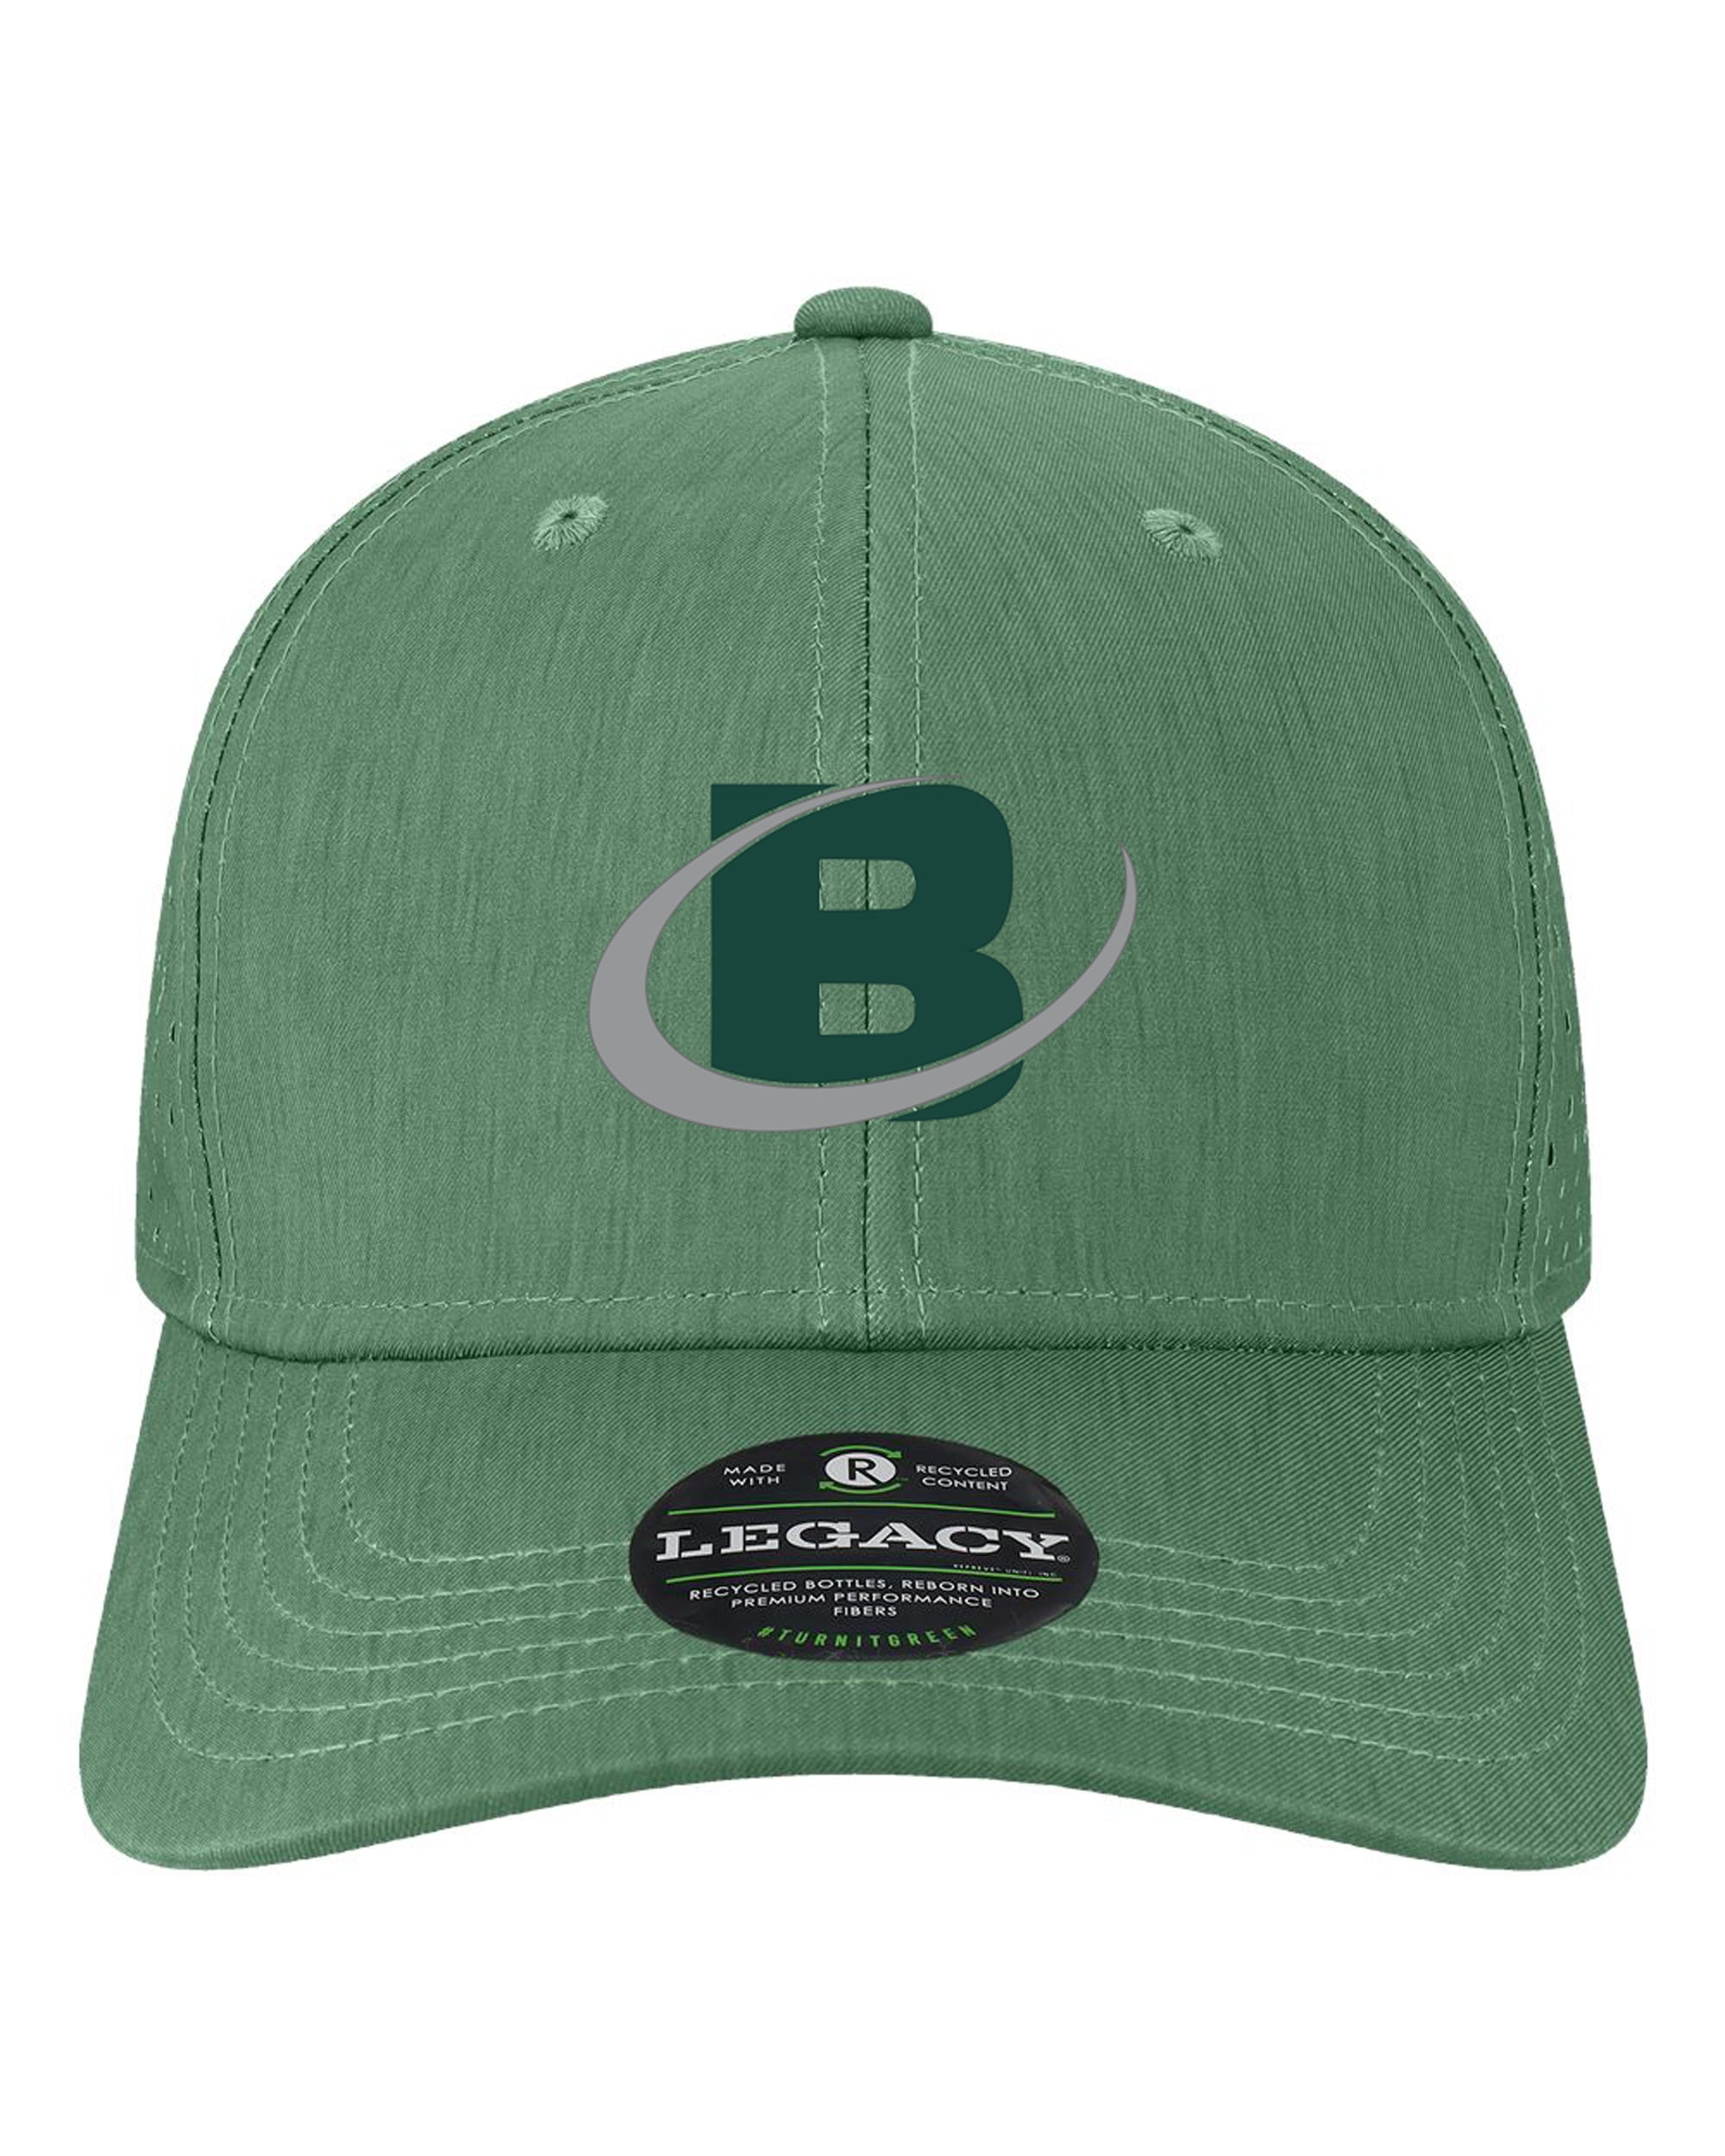 Bowman Turfgrass Professionals - Reclaimed Structured Hat